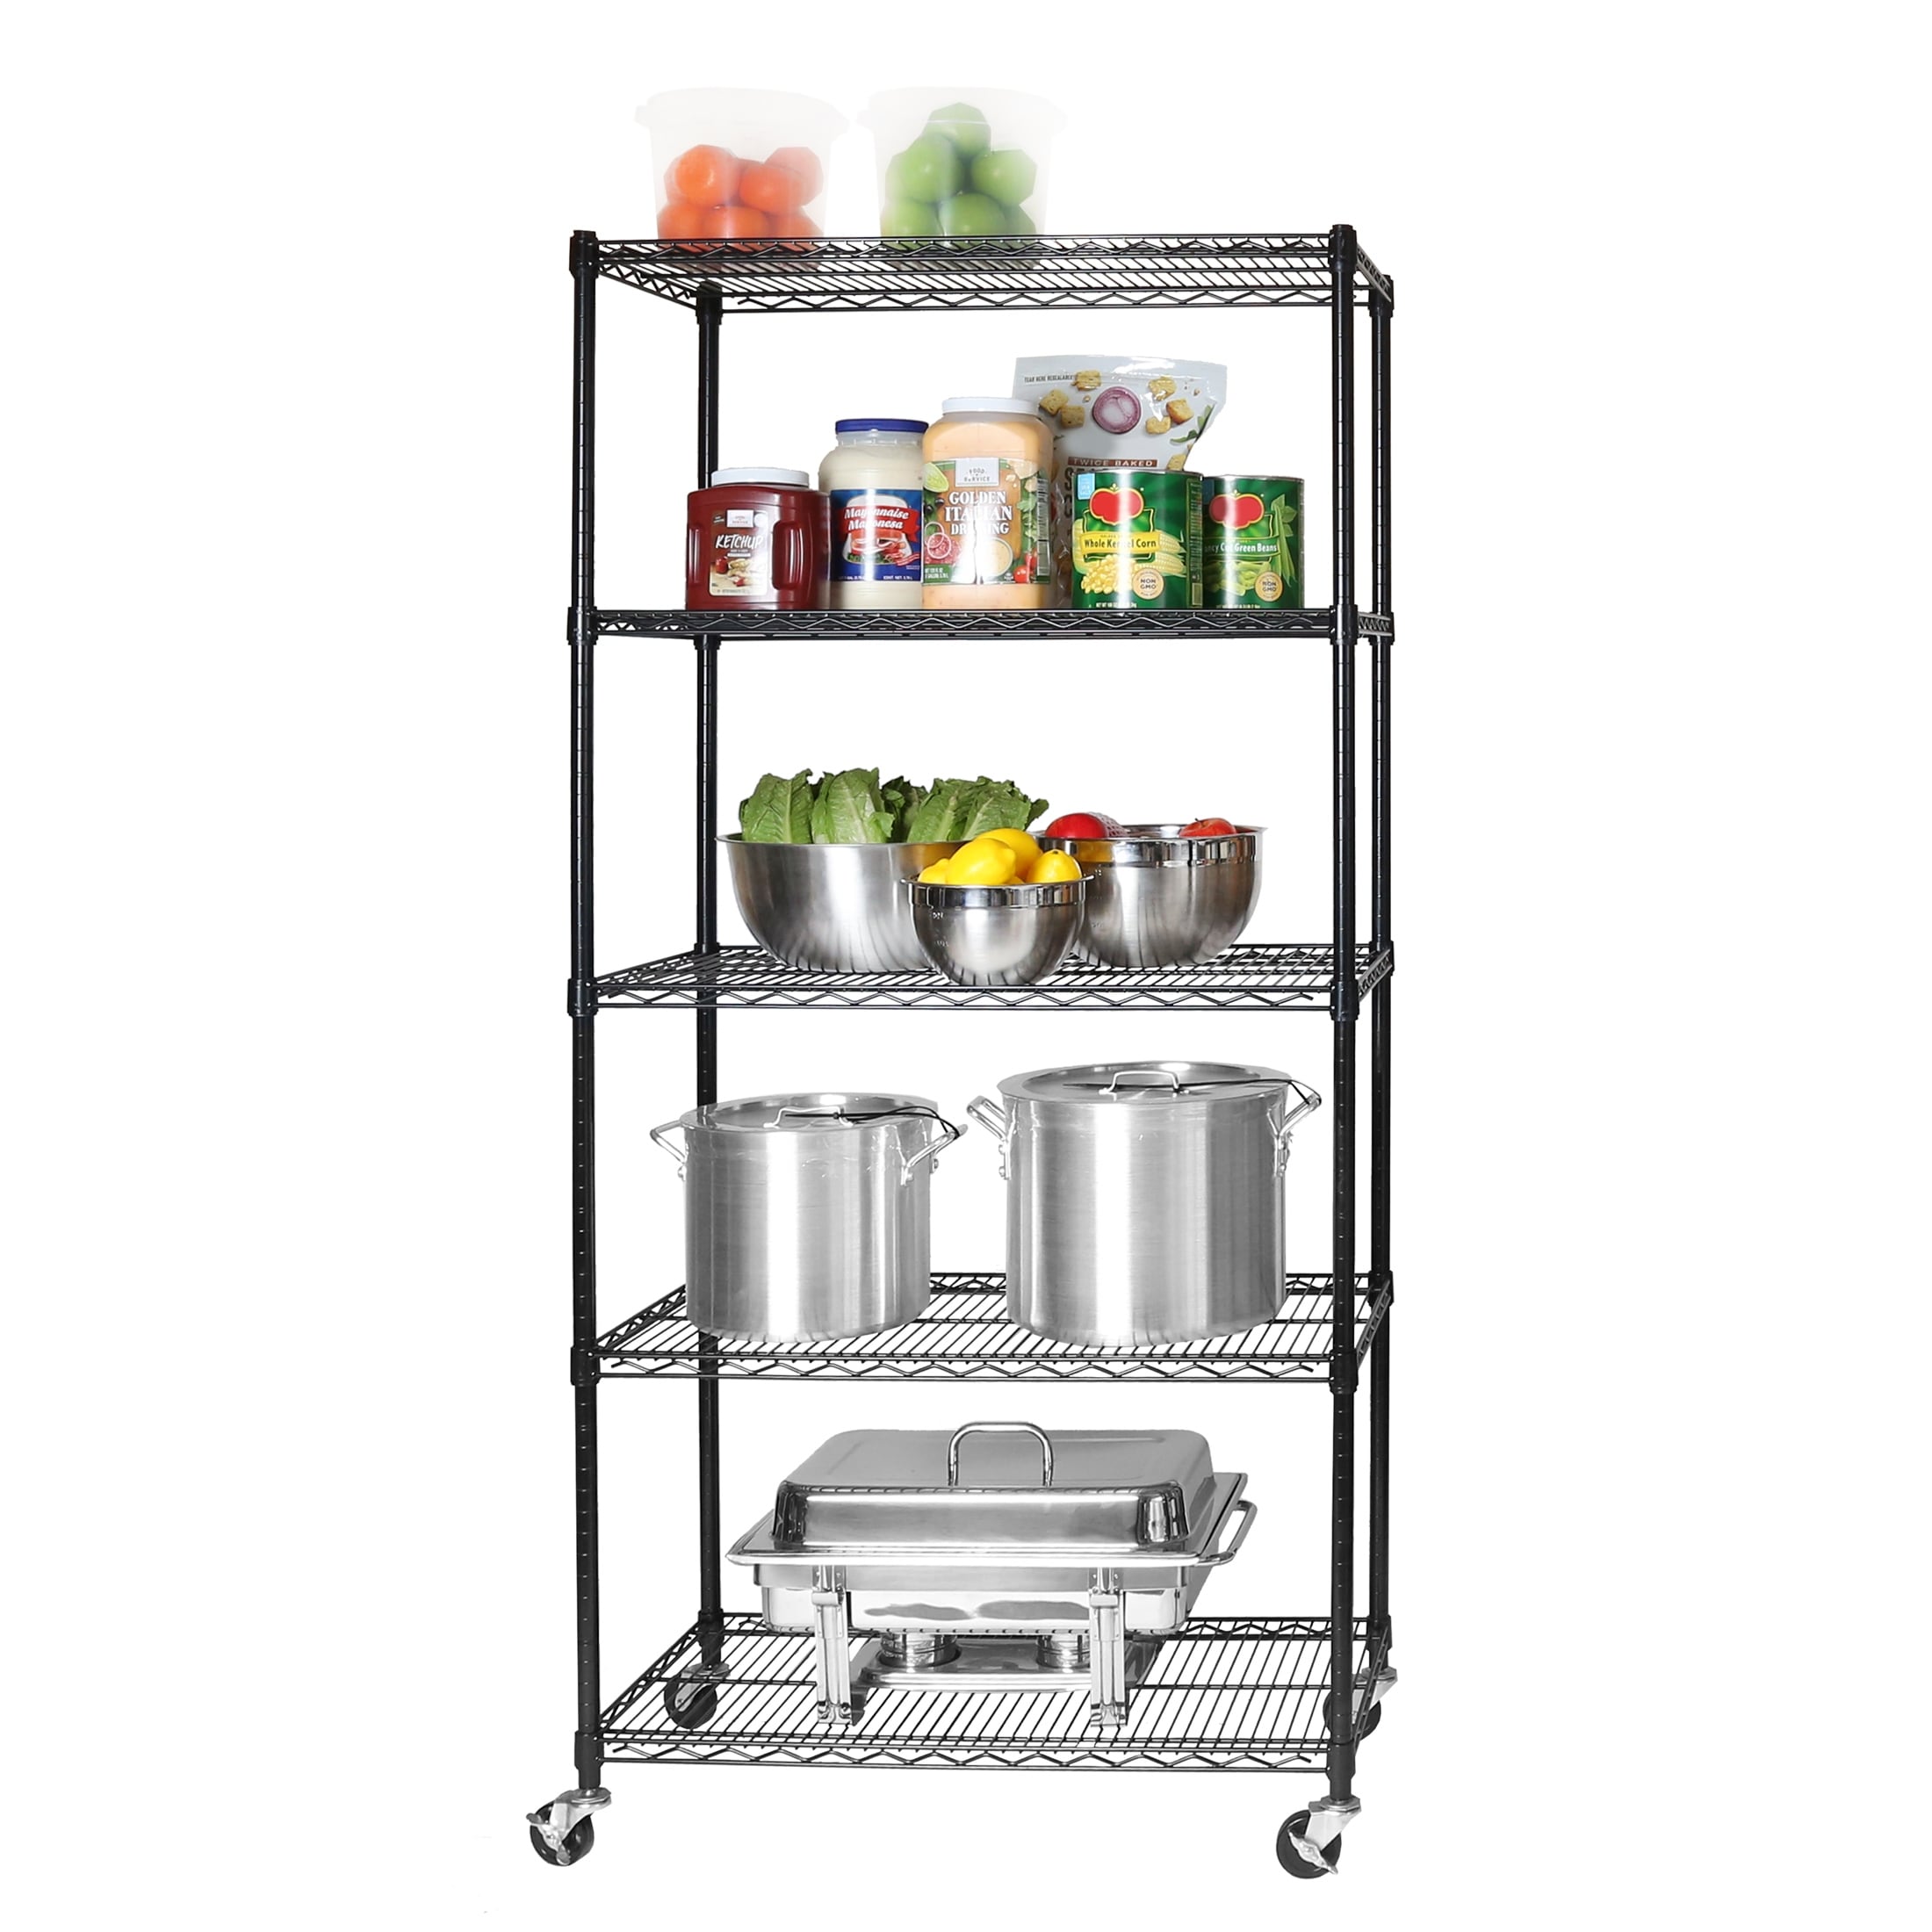  Seville Classics Commerical Grade NSF-Certified Bin Rack  Storage Steel Wire Shelving System - 22 Bins - Gray : Home & Kitchen